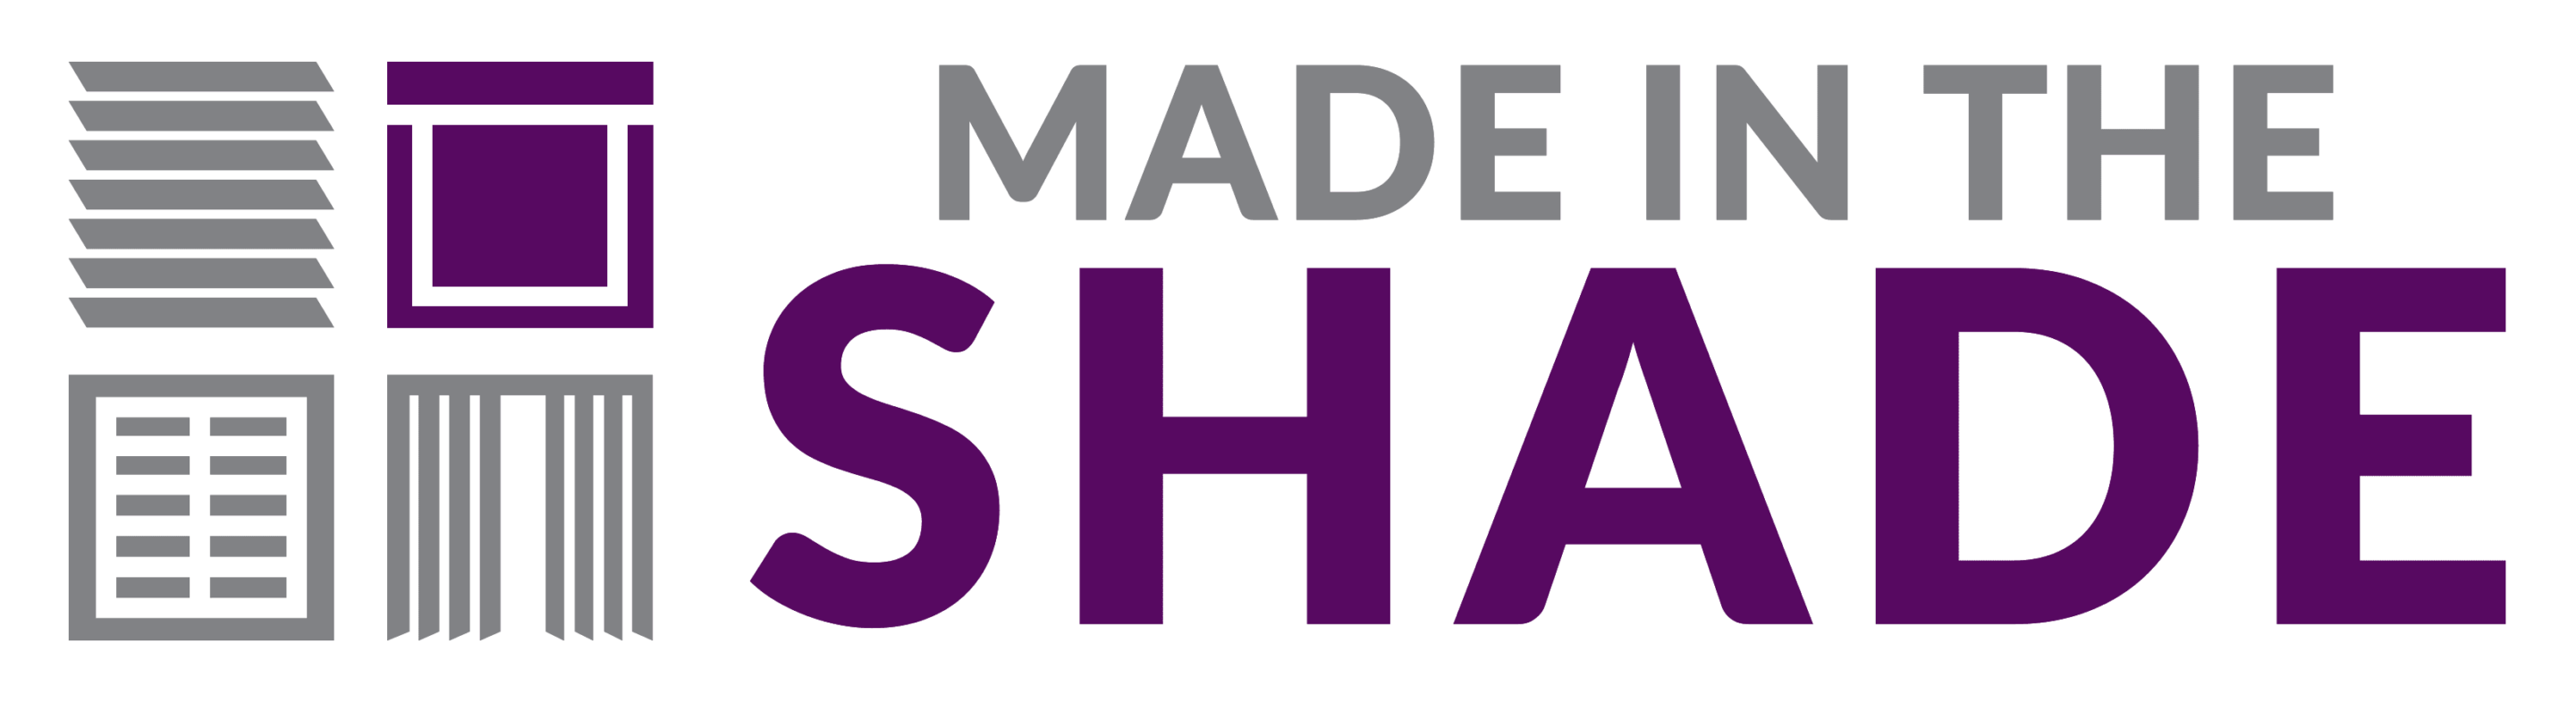 made-in-the-shade-logo